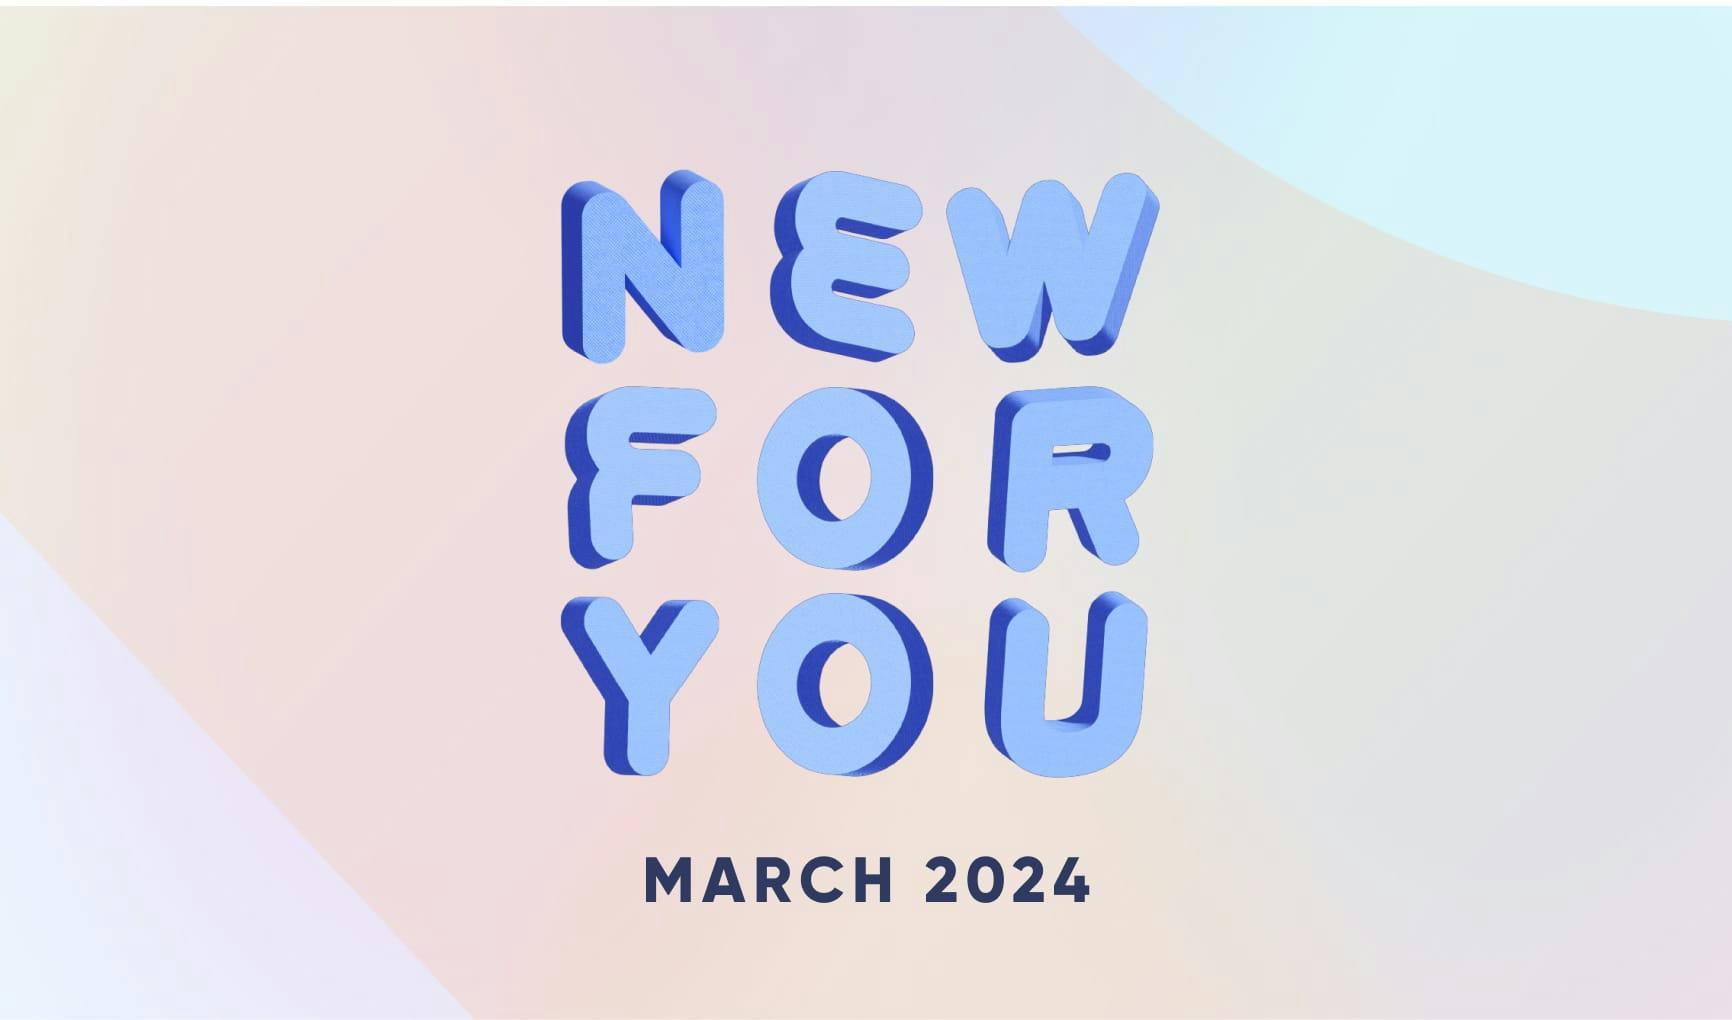 Blue graphic letters reading "New For You March 202."